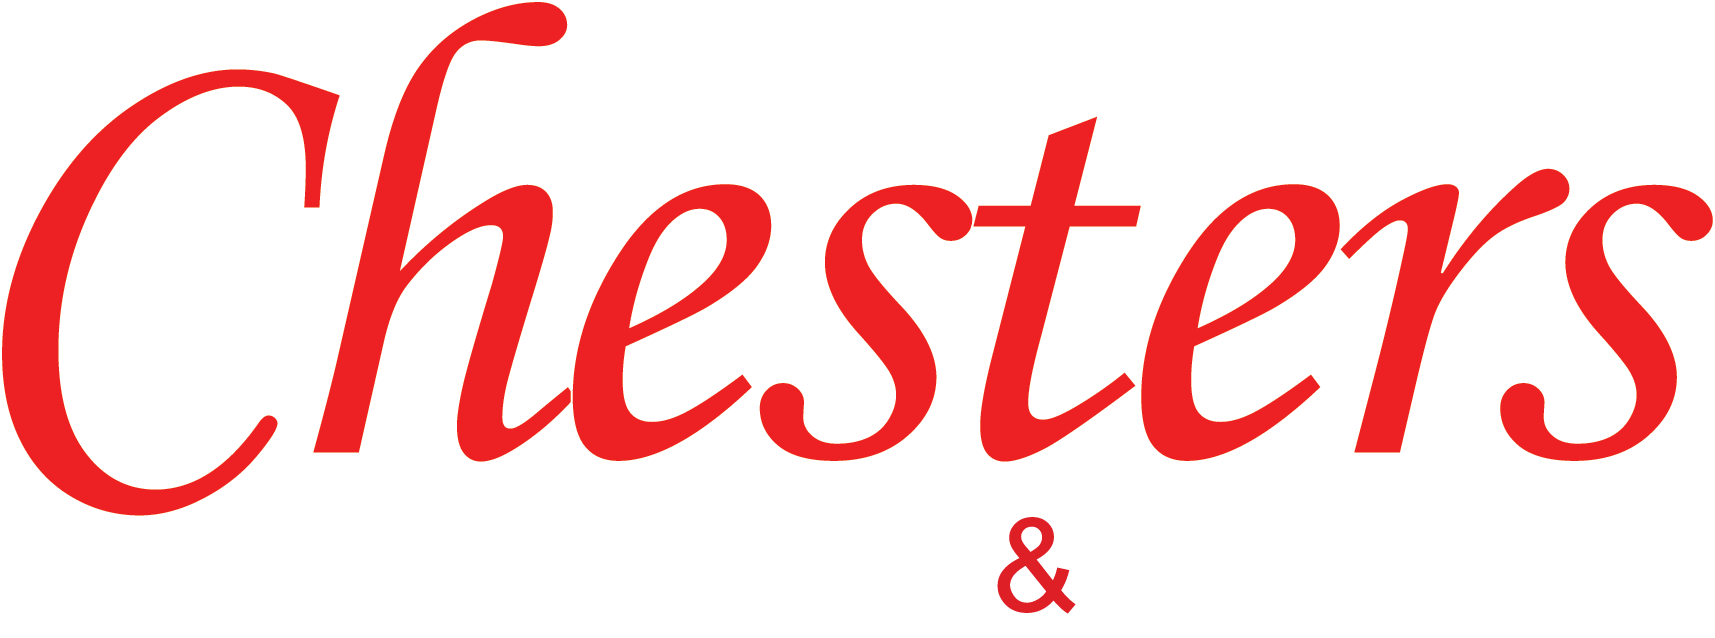 Chesters Restaurant And Takeaway